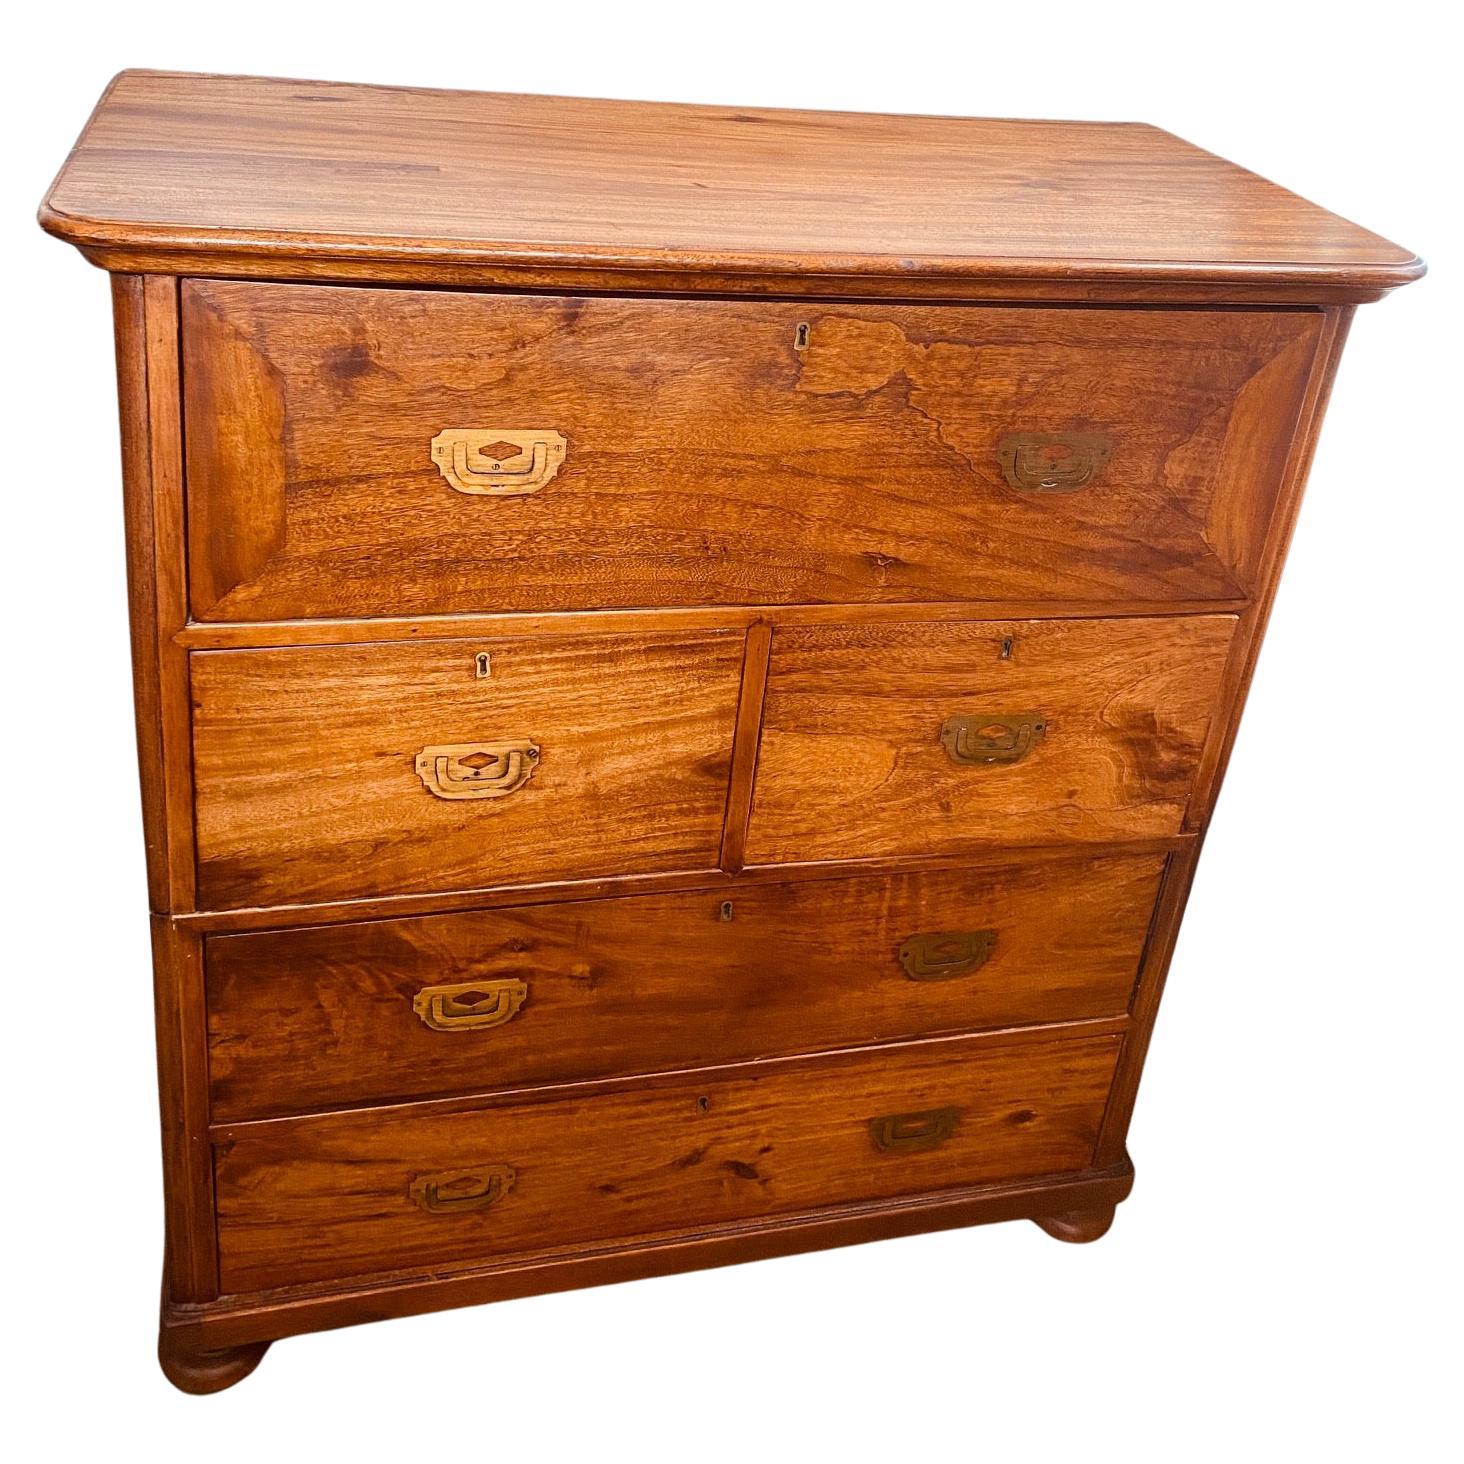 19th Century Camphor Wood Campaign Chest with Desk Drawer